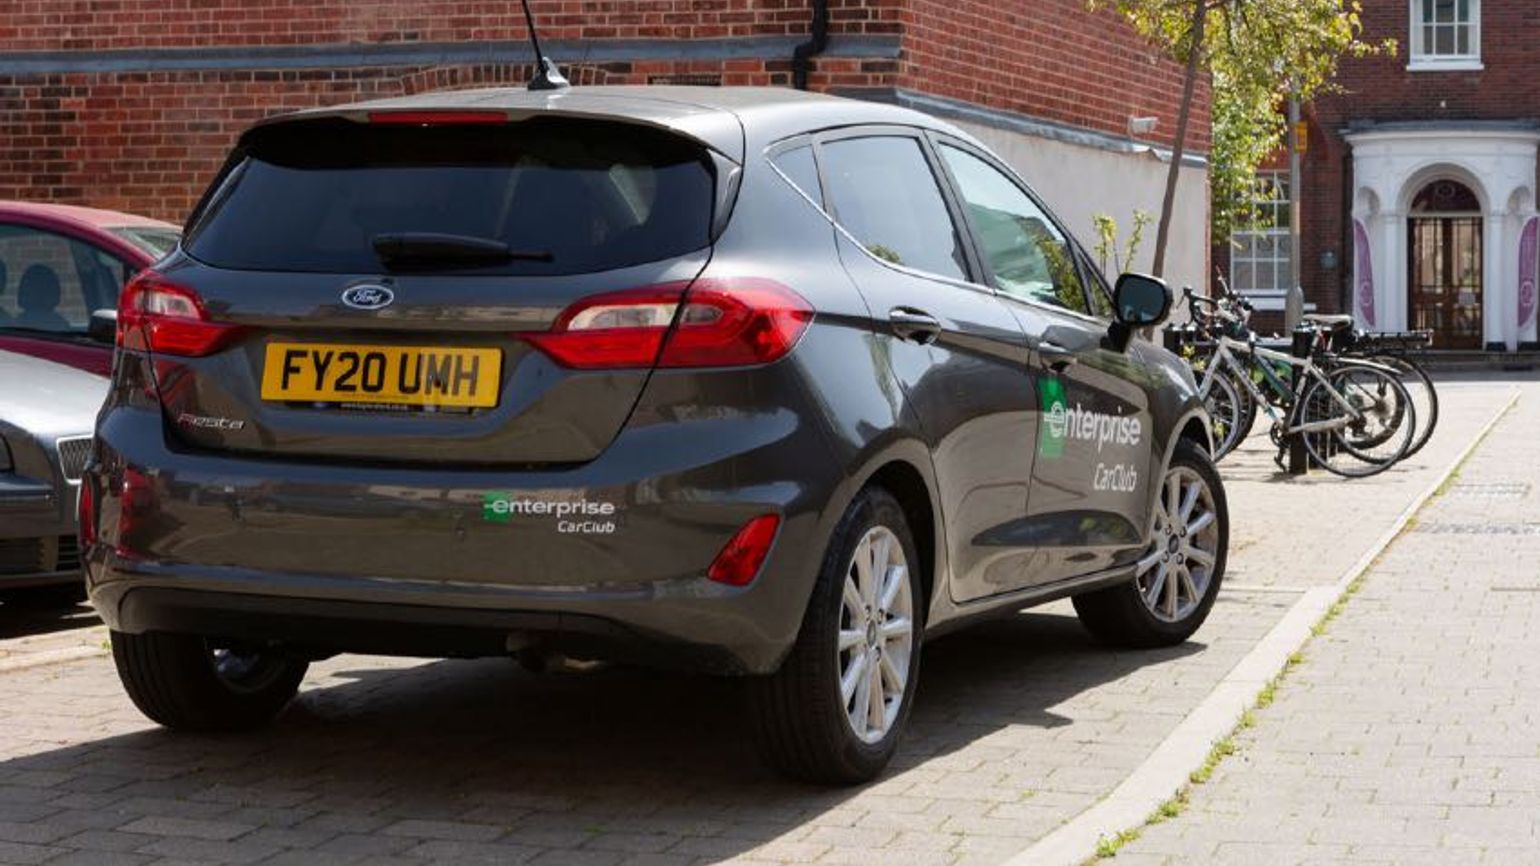 Enterprise takes over running of car club in Norwich 